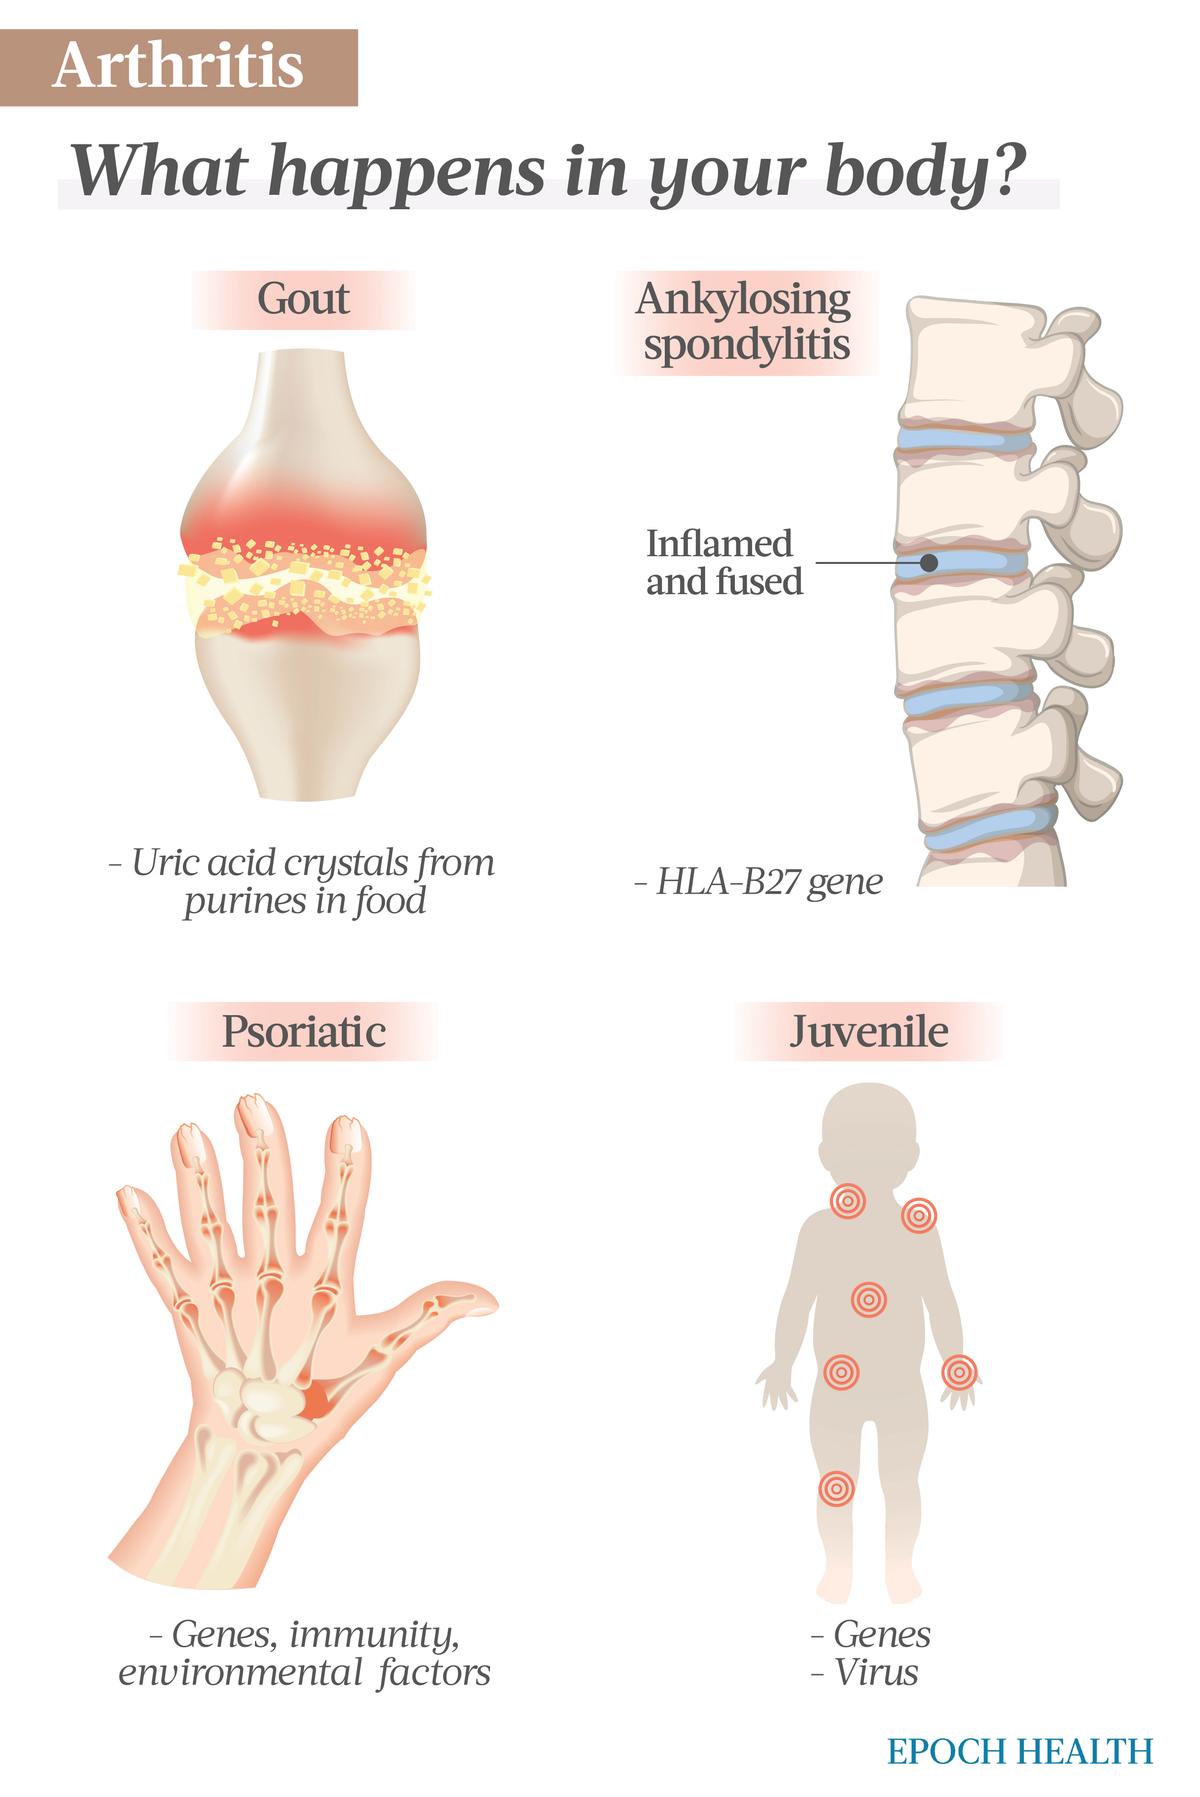  Gout, ankylosing spondylitis, juvenile arthritis, and psoriatic arthritis are only a few of the many types of arthritis. (The Epoch Times)